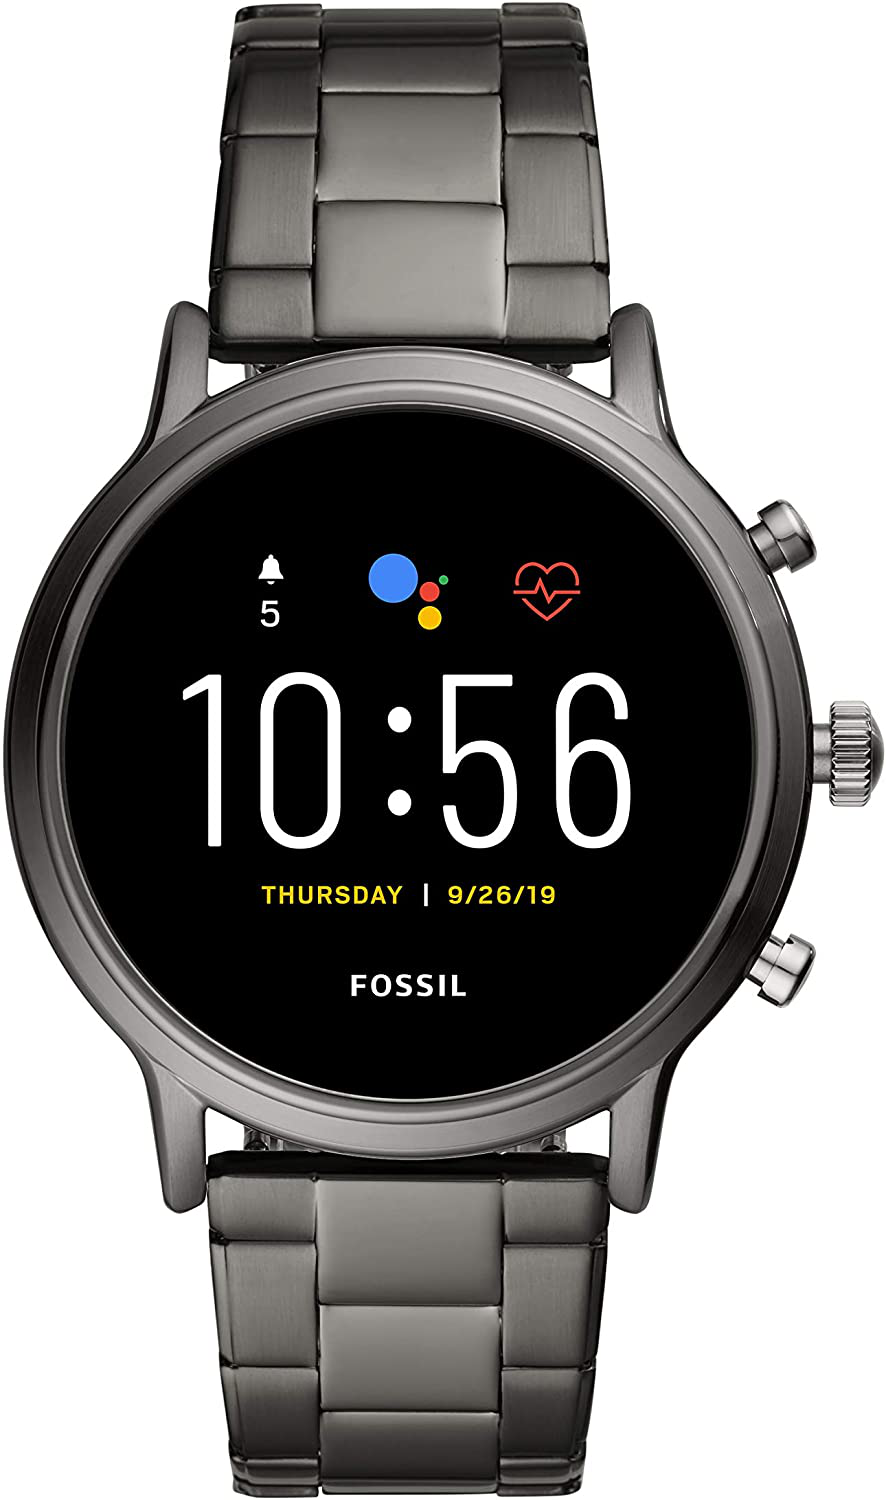 Fossil Carlyle Gen 5 Stainless Steel Touchscreen Smoke/Black Silicone Smartwatch